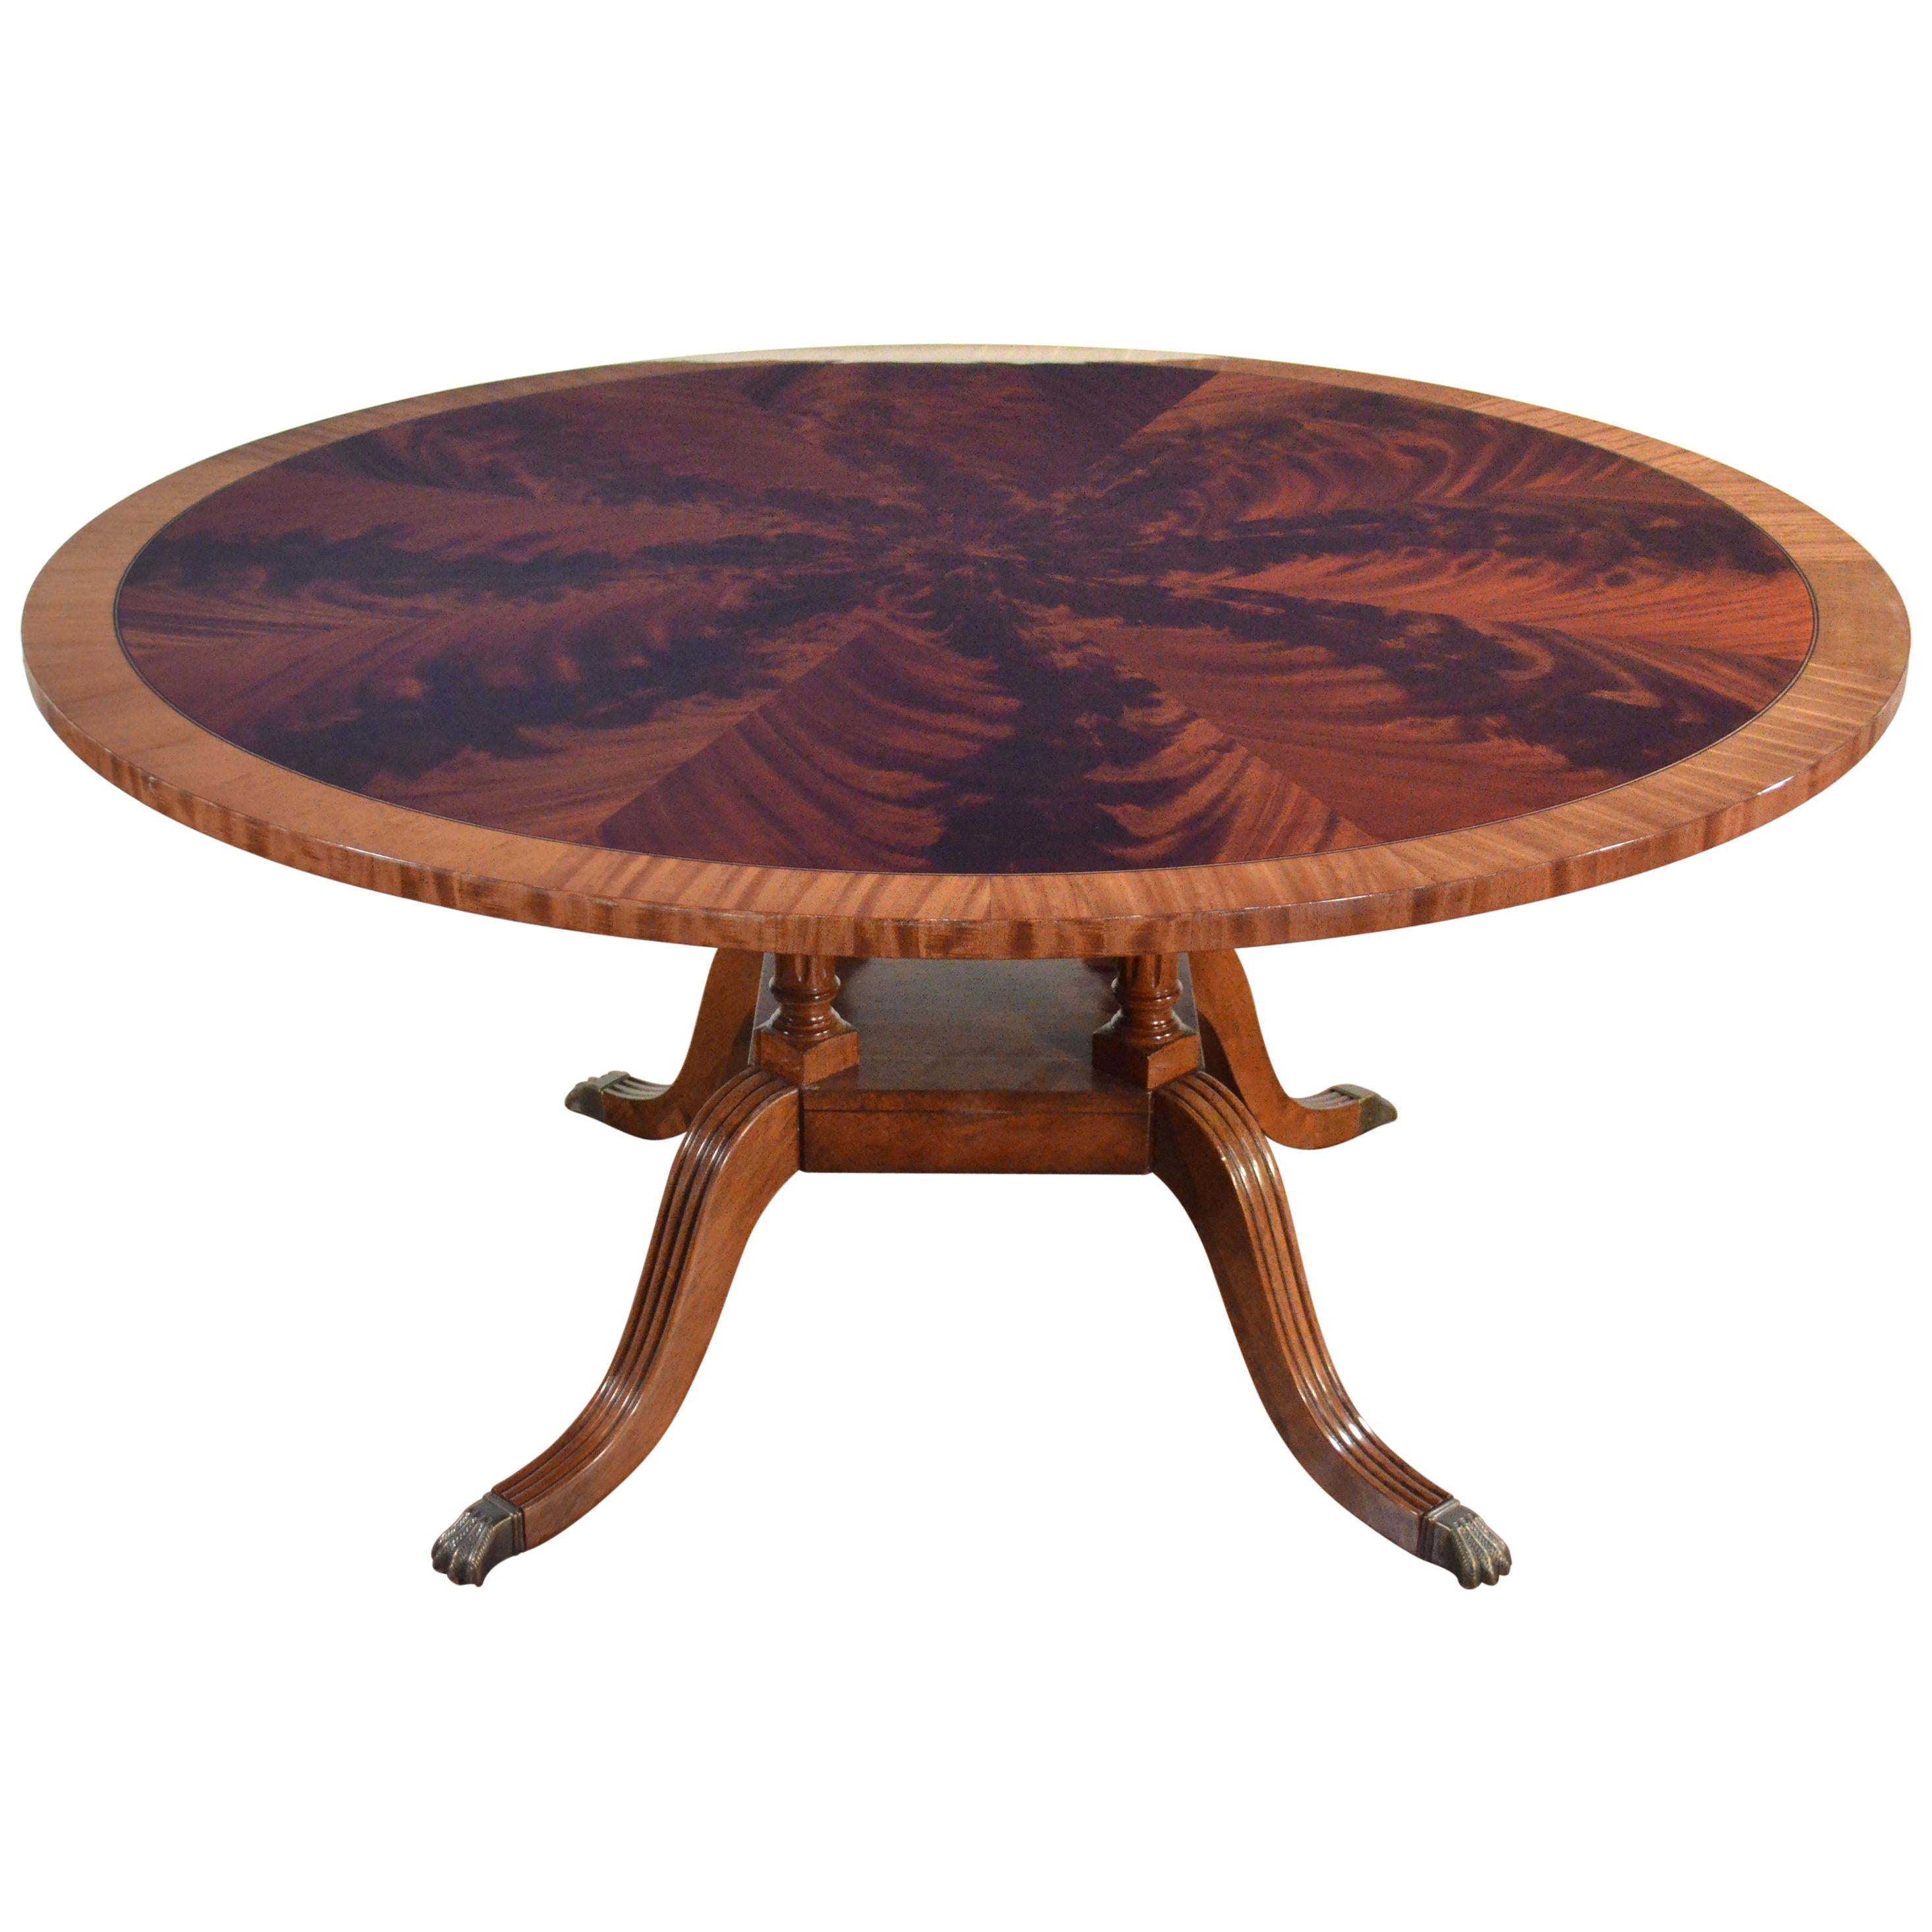 Round Mahogany Georgian Style Pedestal Dining Table by Leighton Hall For Sale